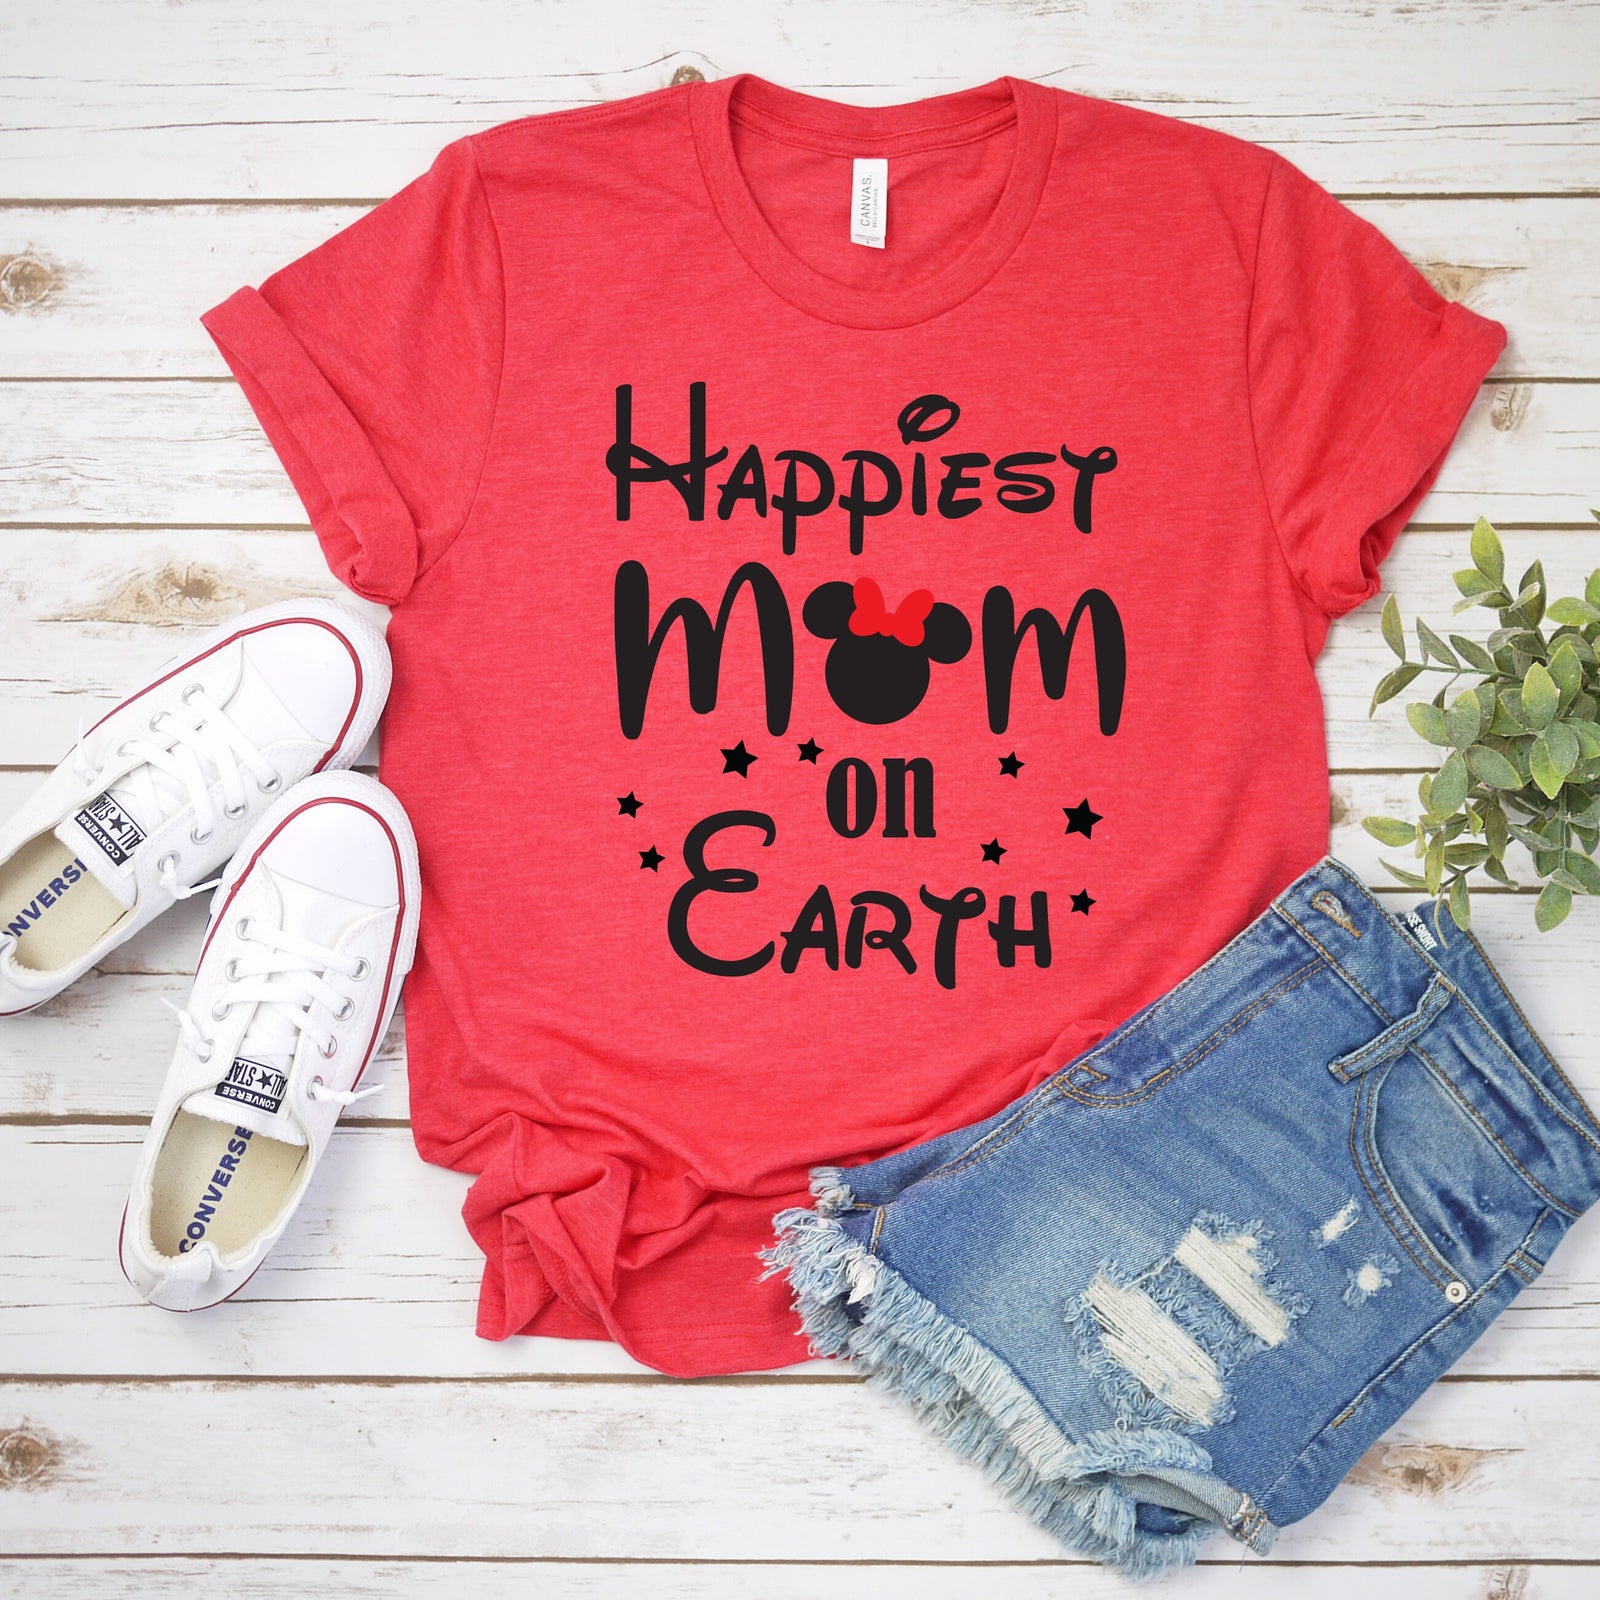 Happiest Mom on Earth Minnie Mouse Adult T Shirt- Disney Bound - Fun Family Shirts